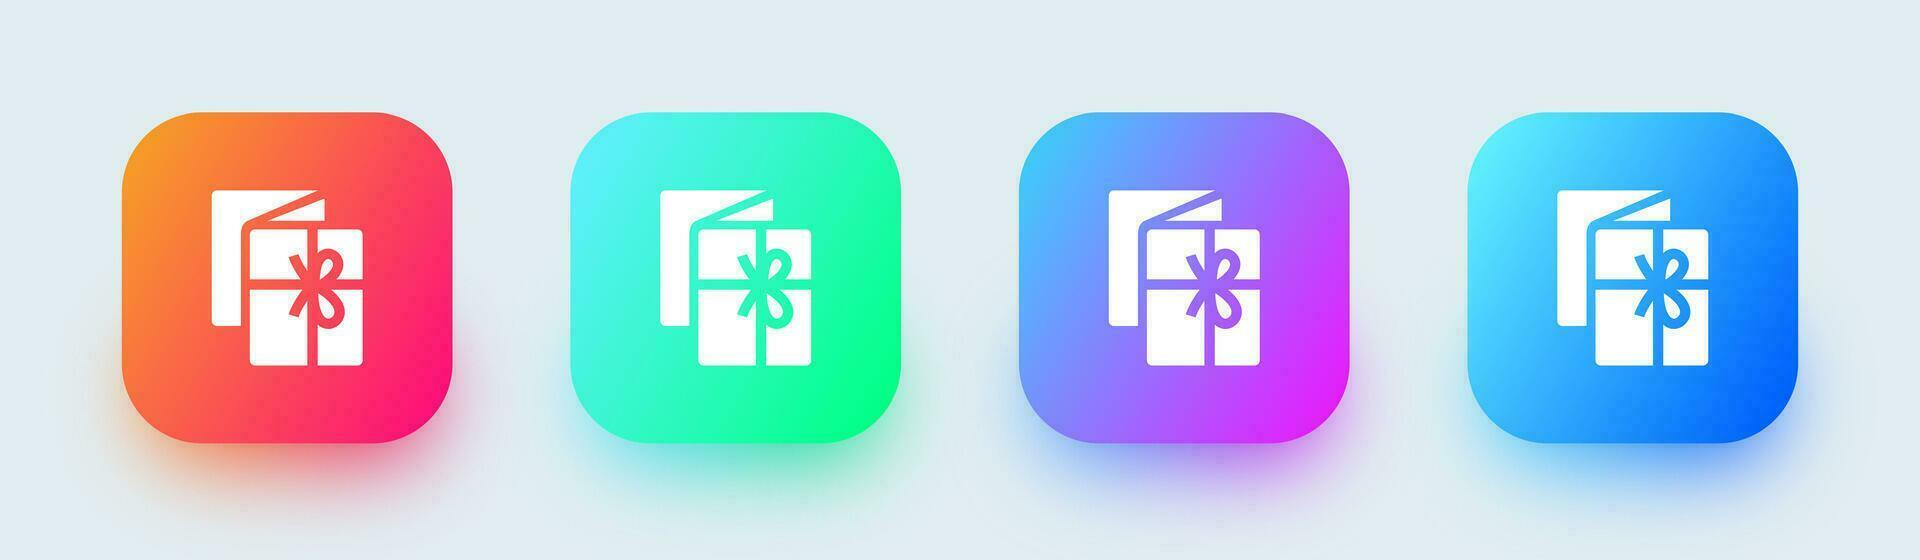 Gift solid icon in square gradient colors. Surprise signs vector illustration.